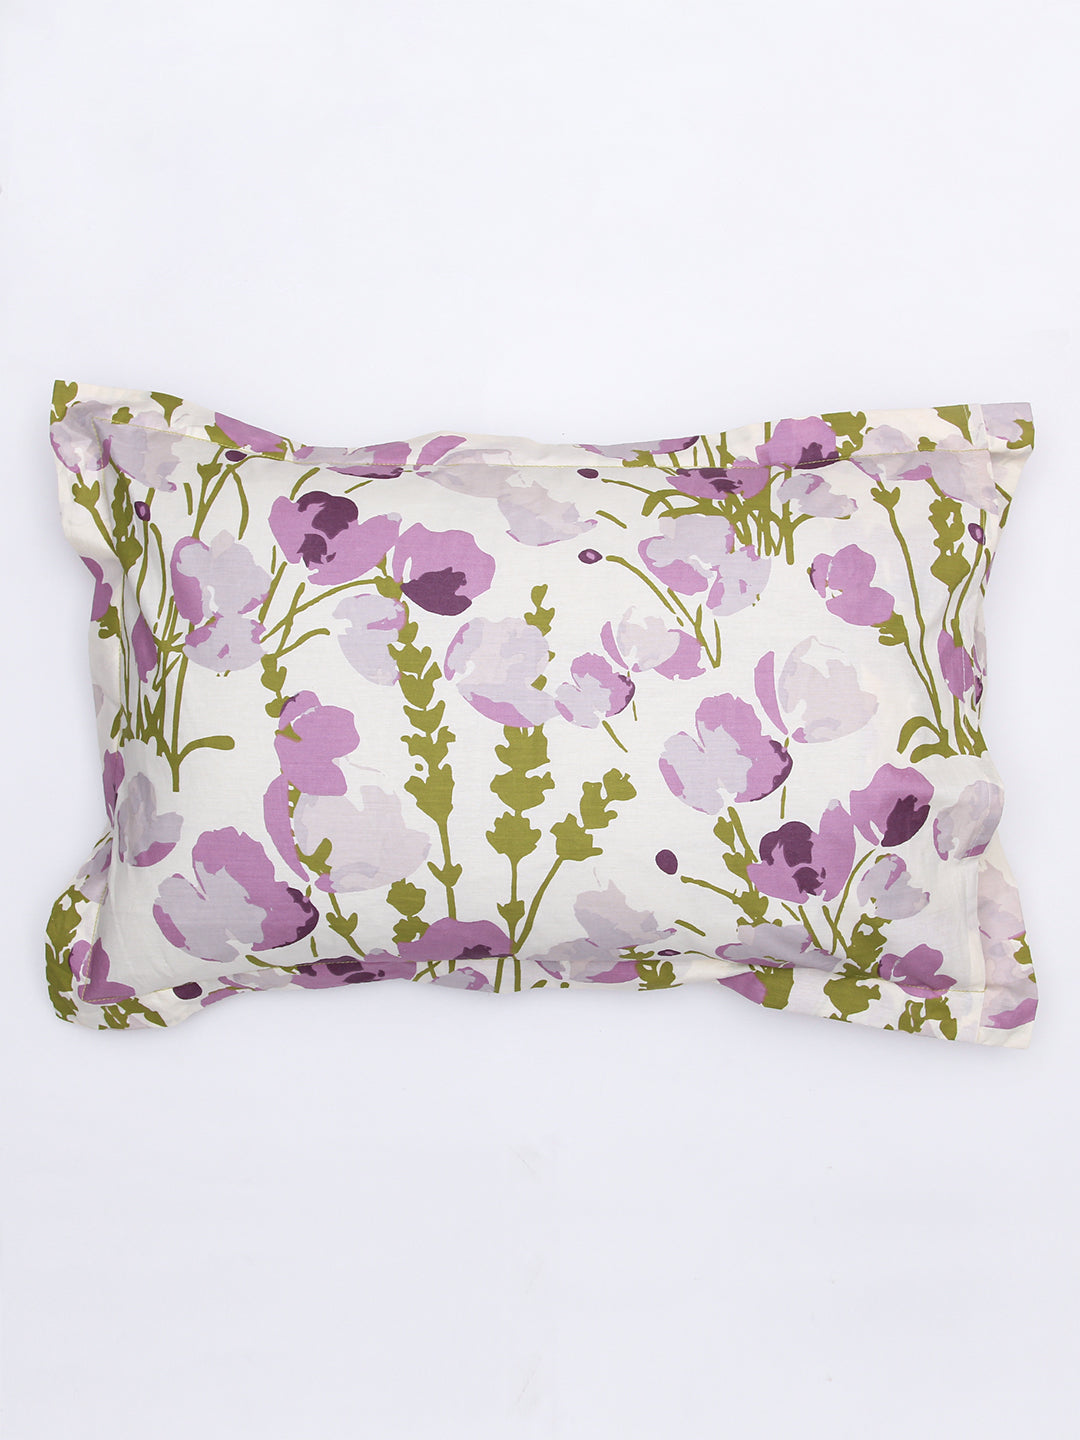 Himalayan Poppies Pillow Cover (Purple)